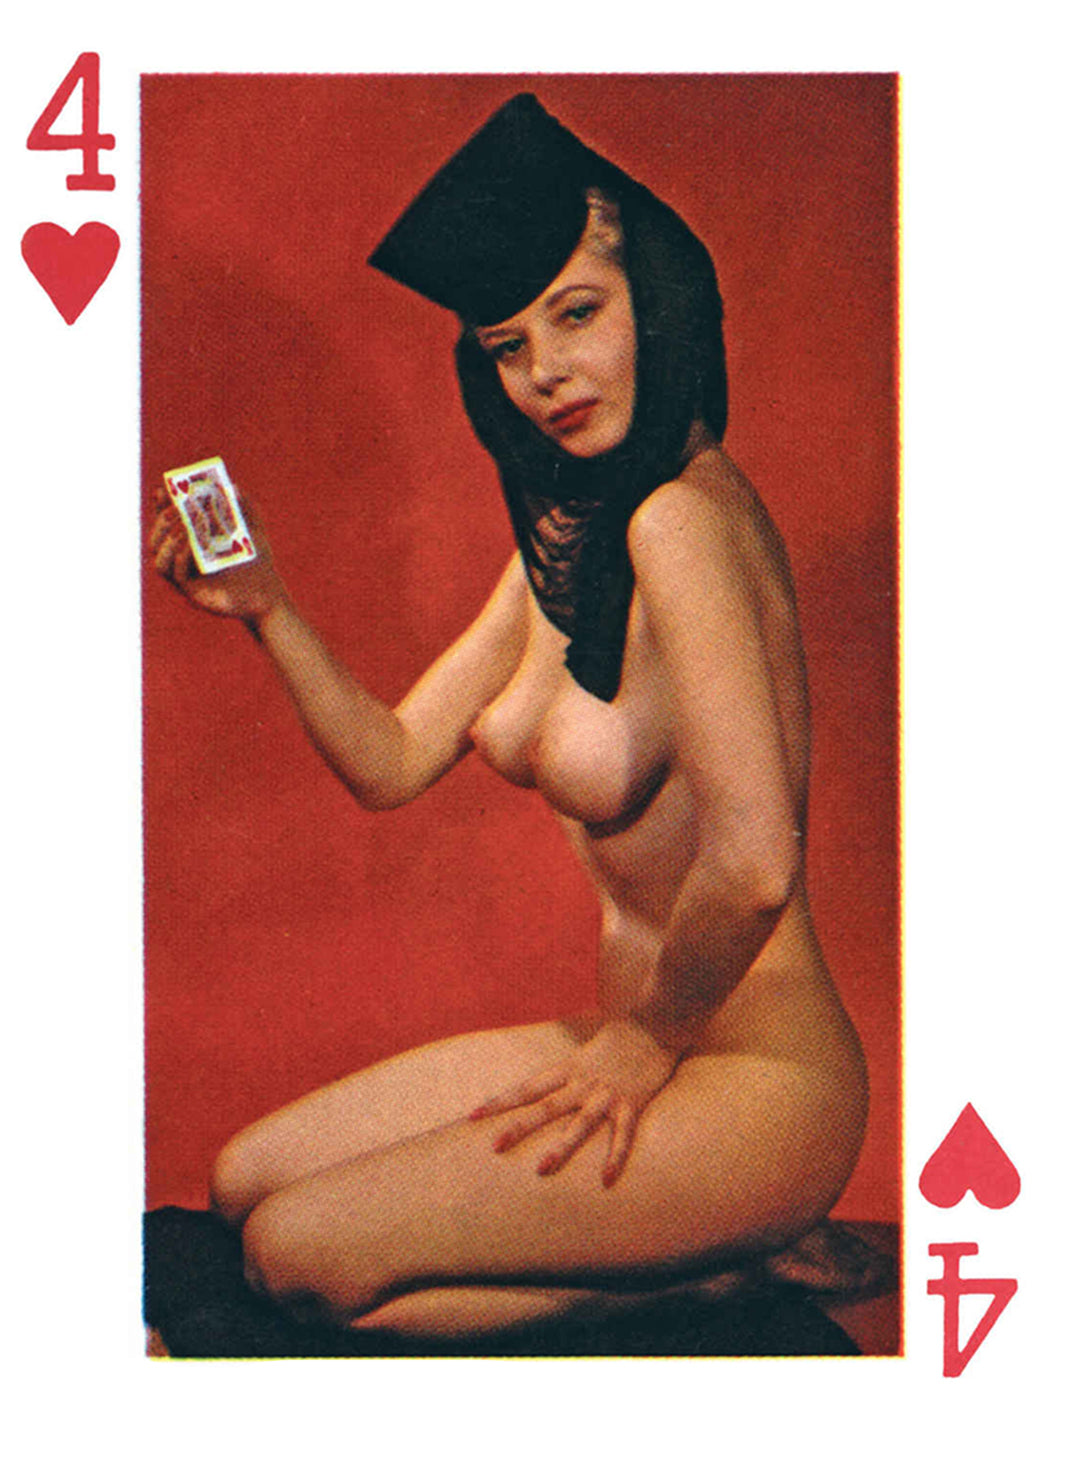 Porn Playing Cards 1940s - Vintage 1940's Fifty-Two Art Studies Nude Pin-up Playing Cards â€“ PleaseKnock